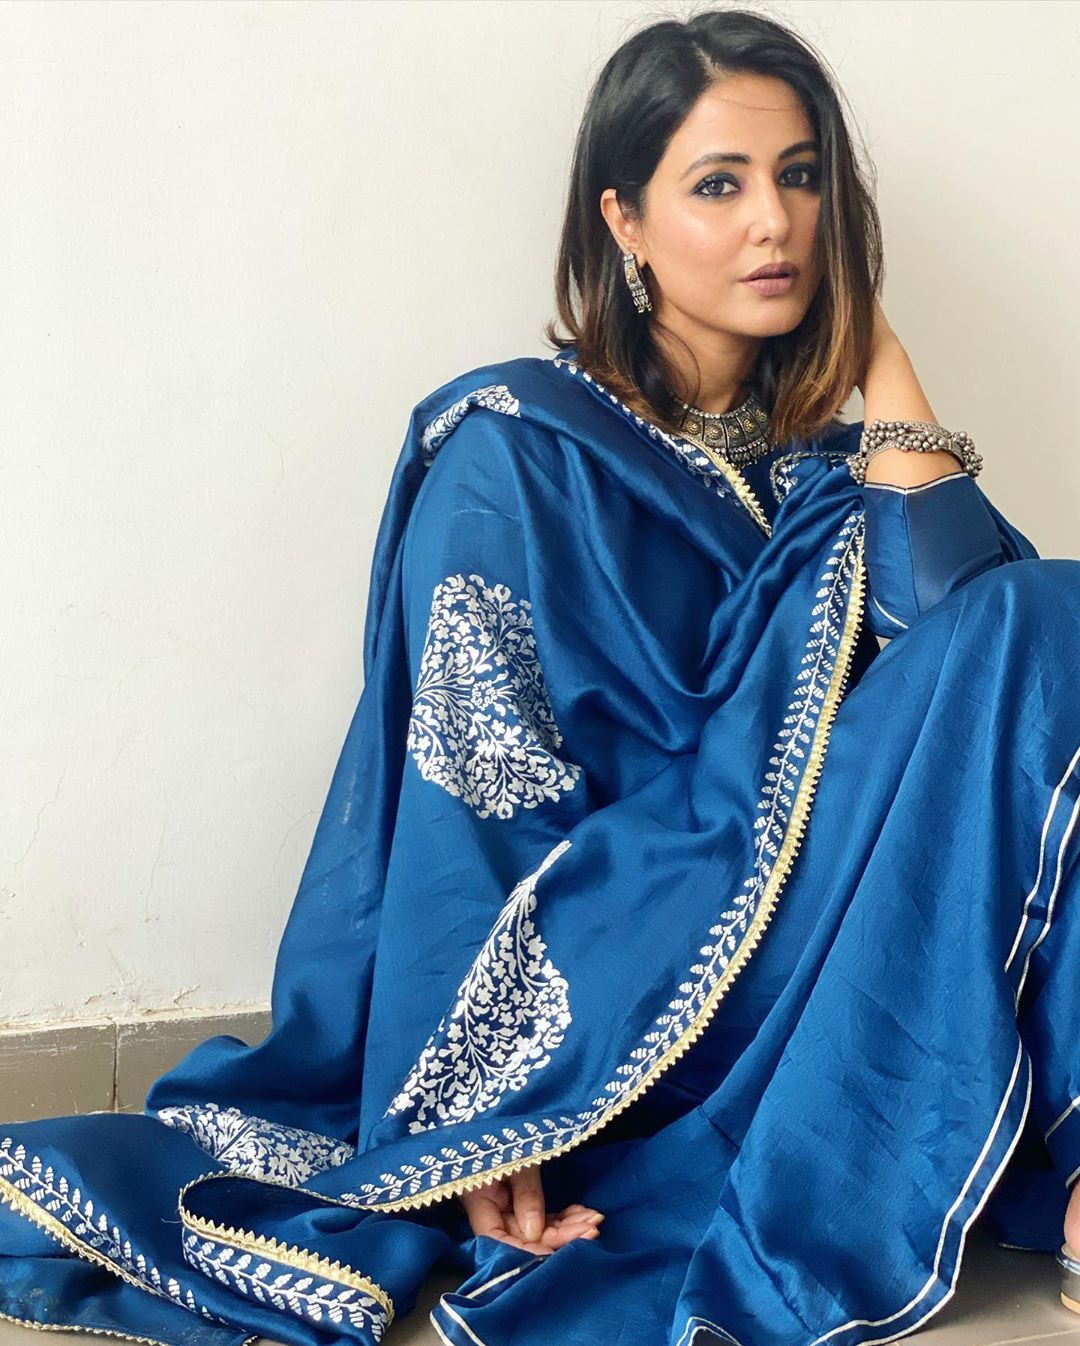 Hina Khan Says That The TV Audience Will Reject Shows That Are Even A 'Little Progressive', Feels TV Content Won't Change